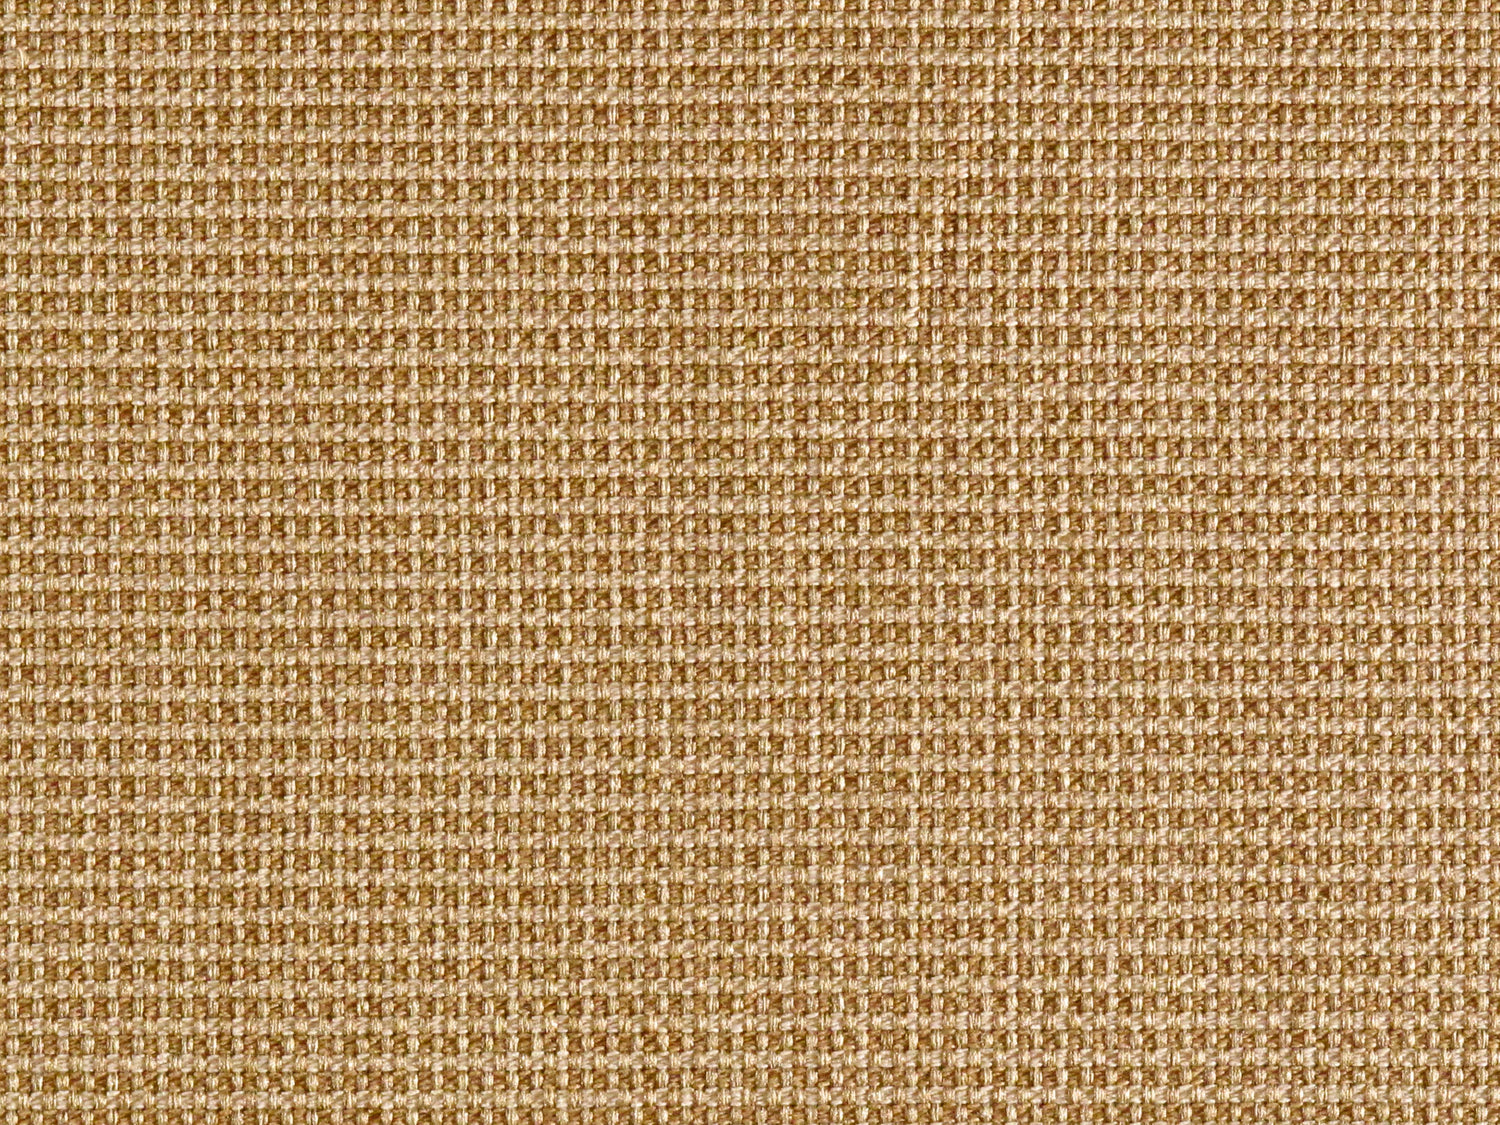 Cataloochee fabric in camel/oatmeal color - pattern number WR 00011399 - by Scalamandre in the Old World Weavers collection